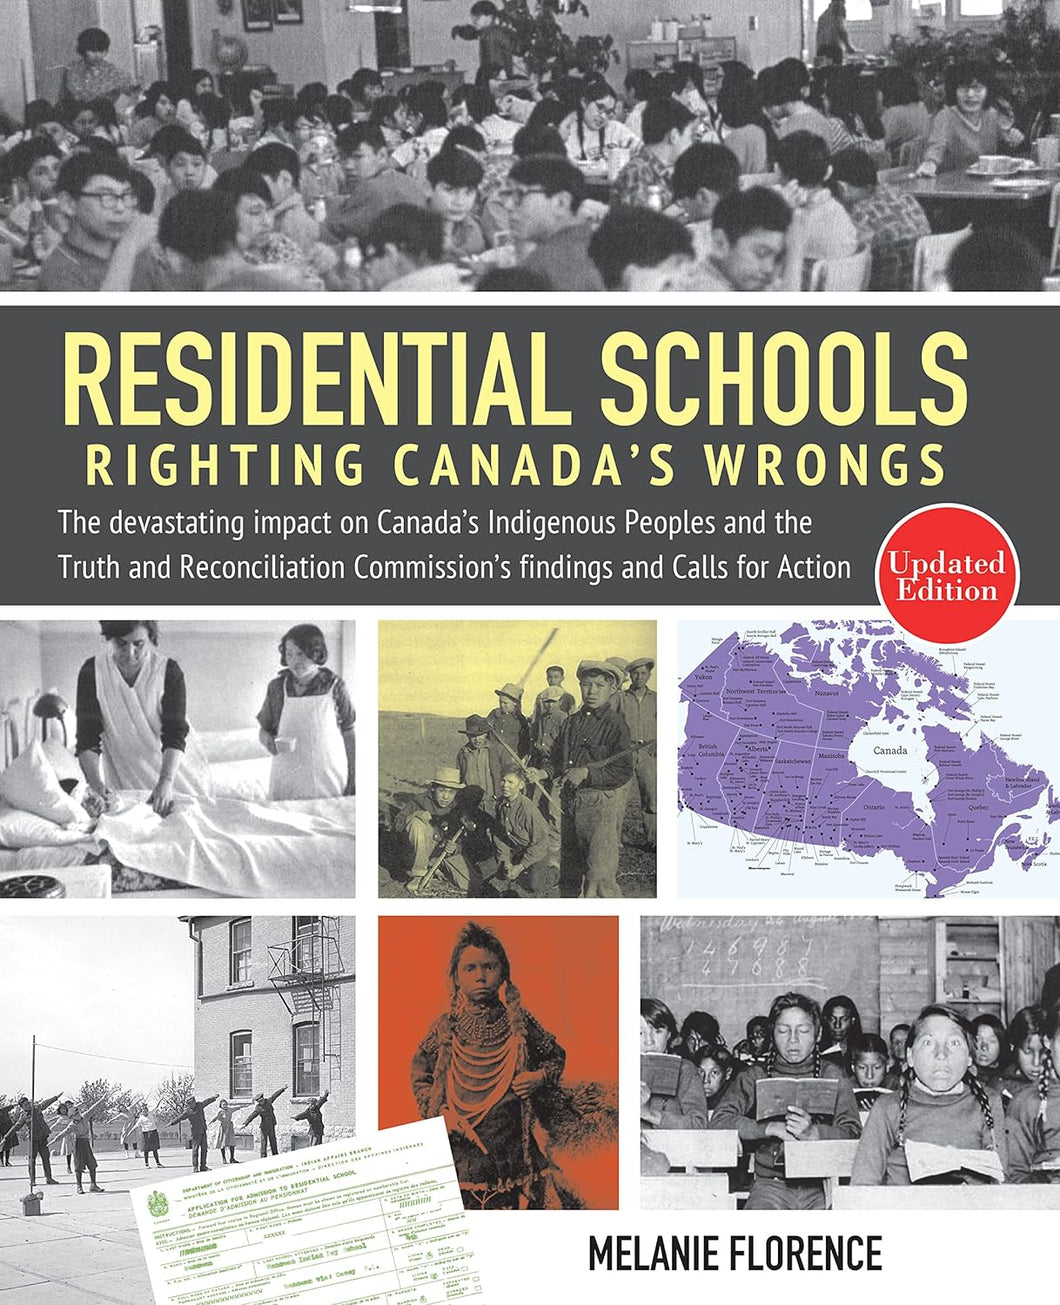 Residential Schools: Righting Canada's Wrongs: The Devastating Impact on Canada's Indigenous Peoples and the Truth and Reconciliation Commission's Findings and Calls for Action UPDATED [Melanie Florence]